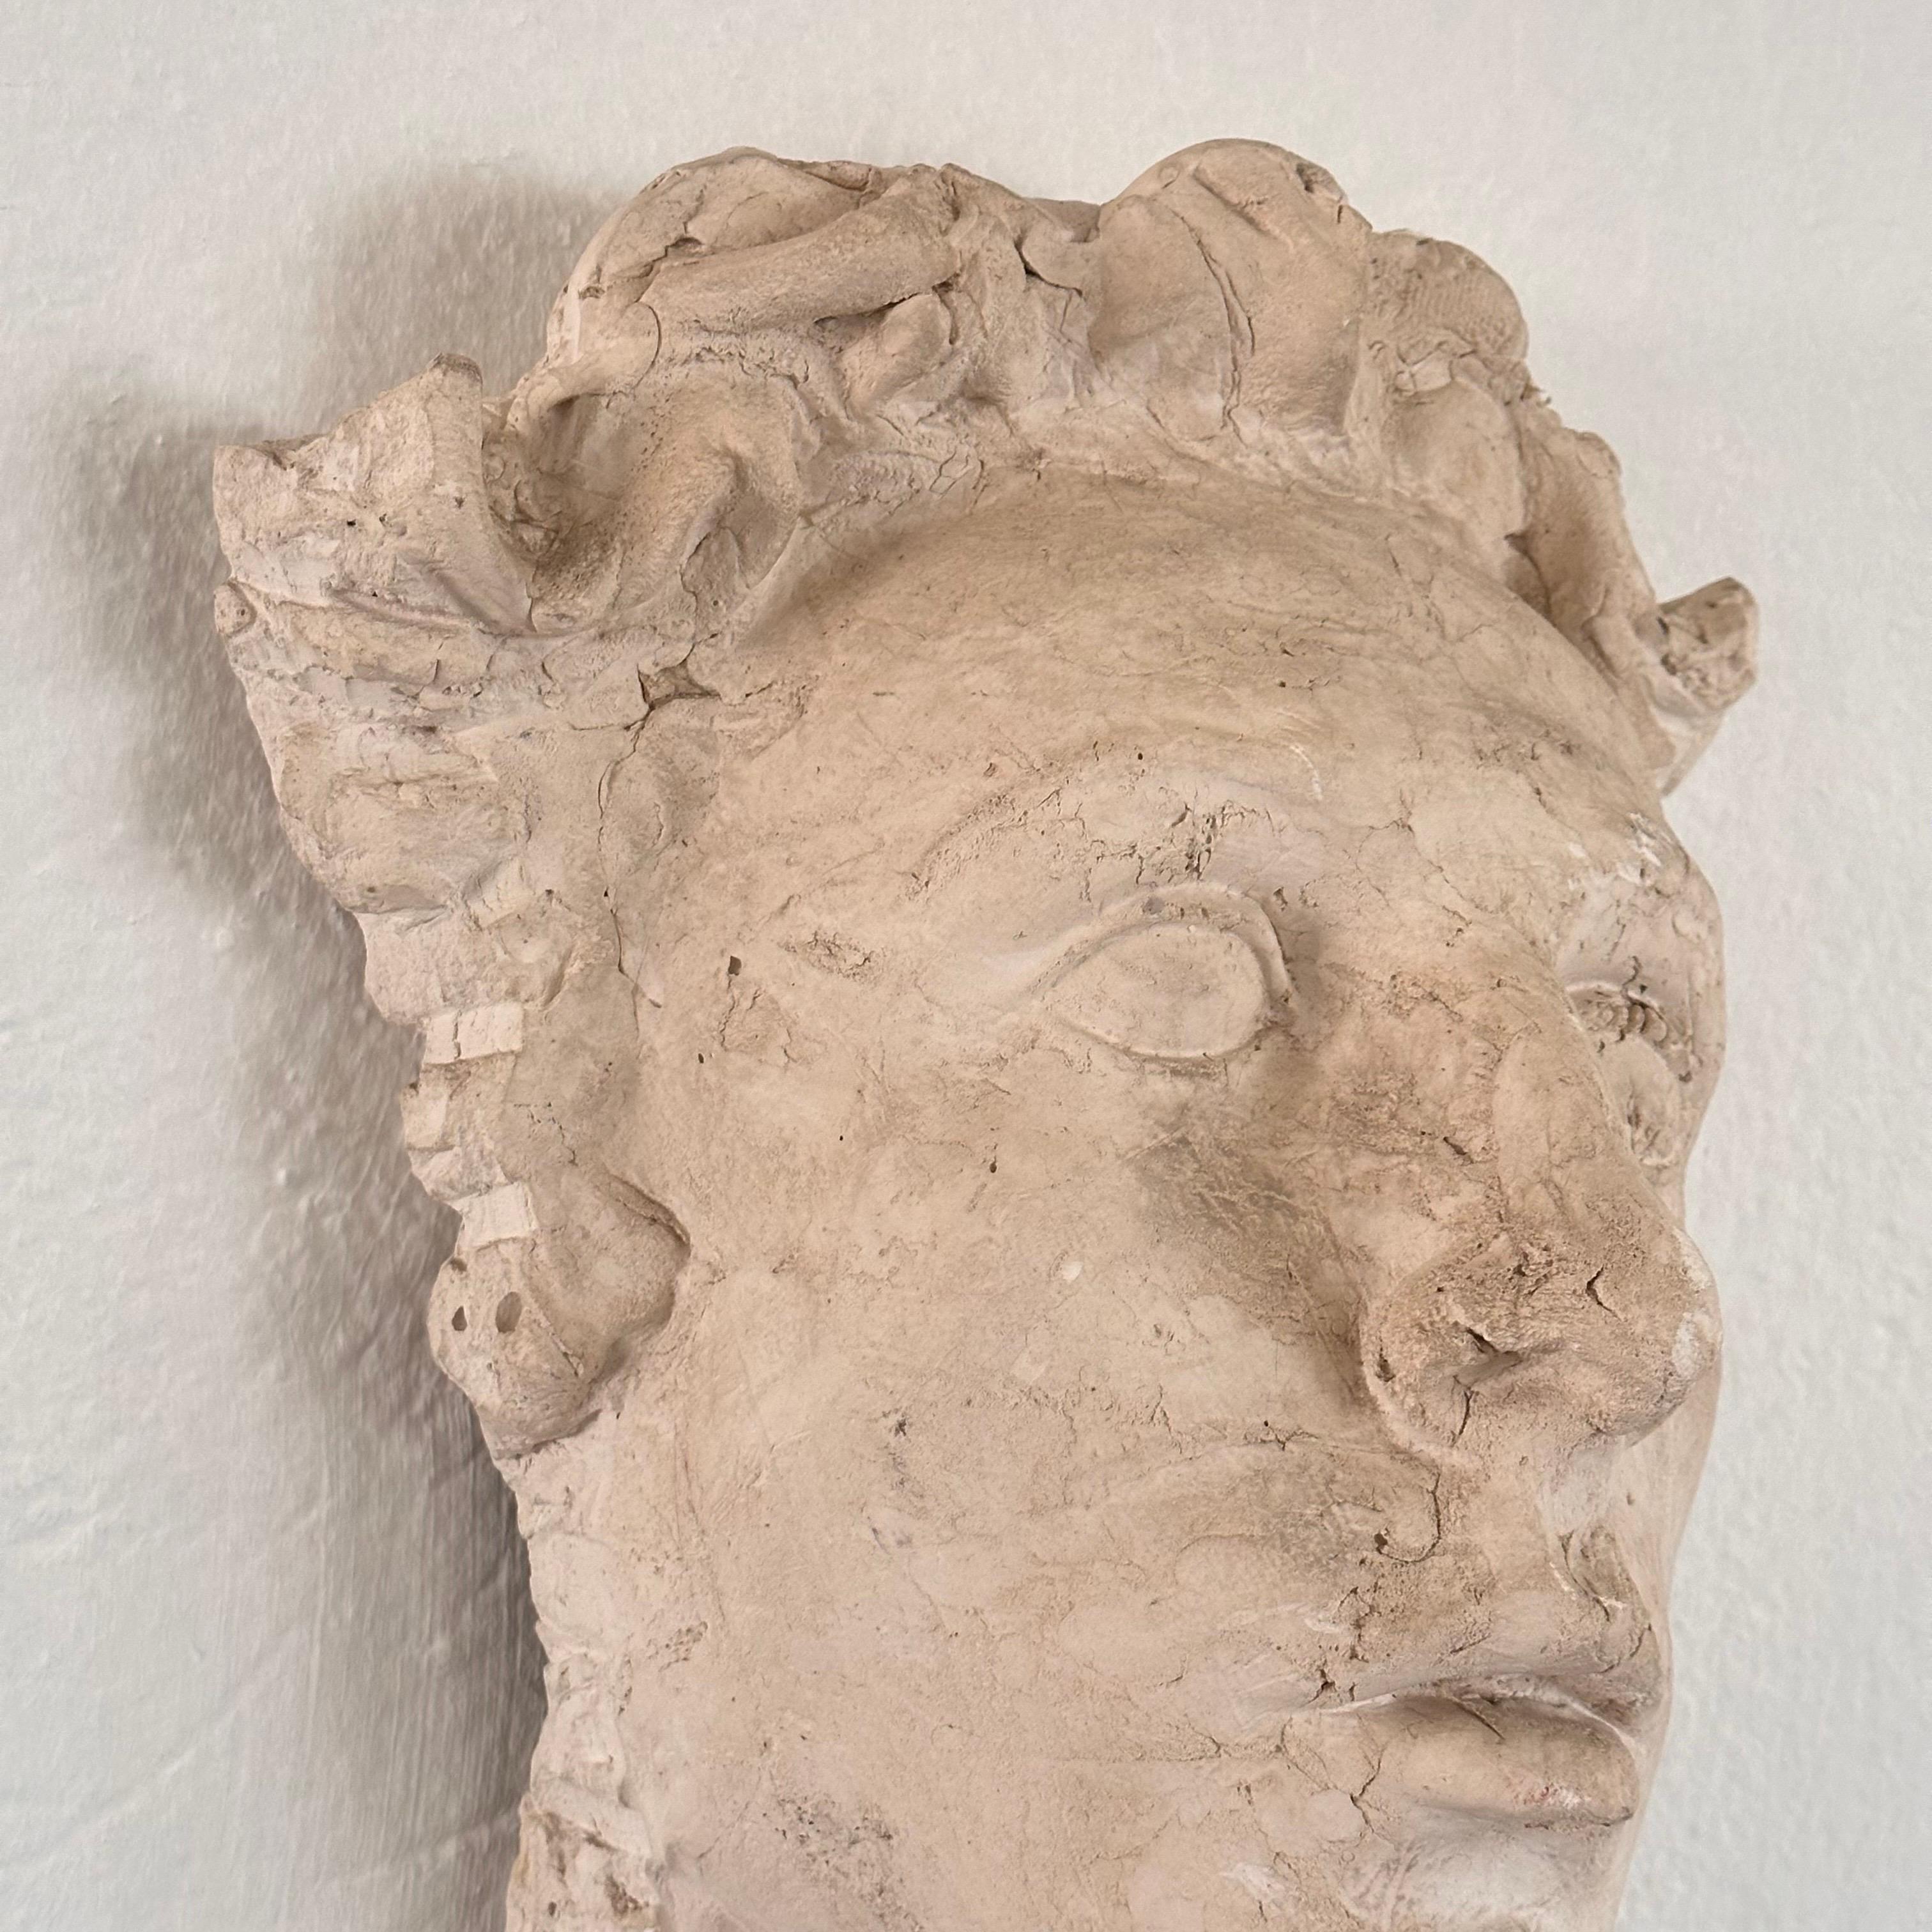 Stunning Decorative Roman Gypsum Face, 1970s Reproduction For Sale 7